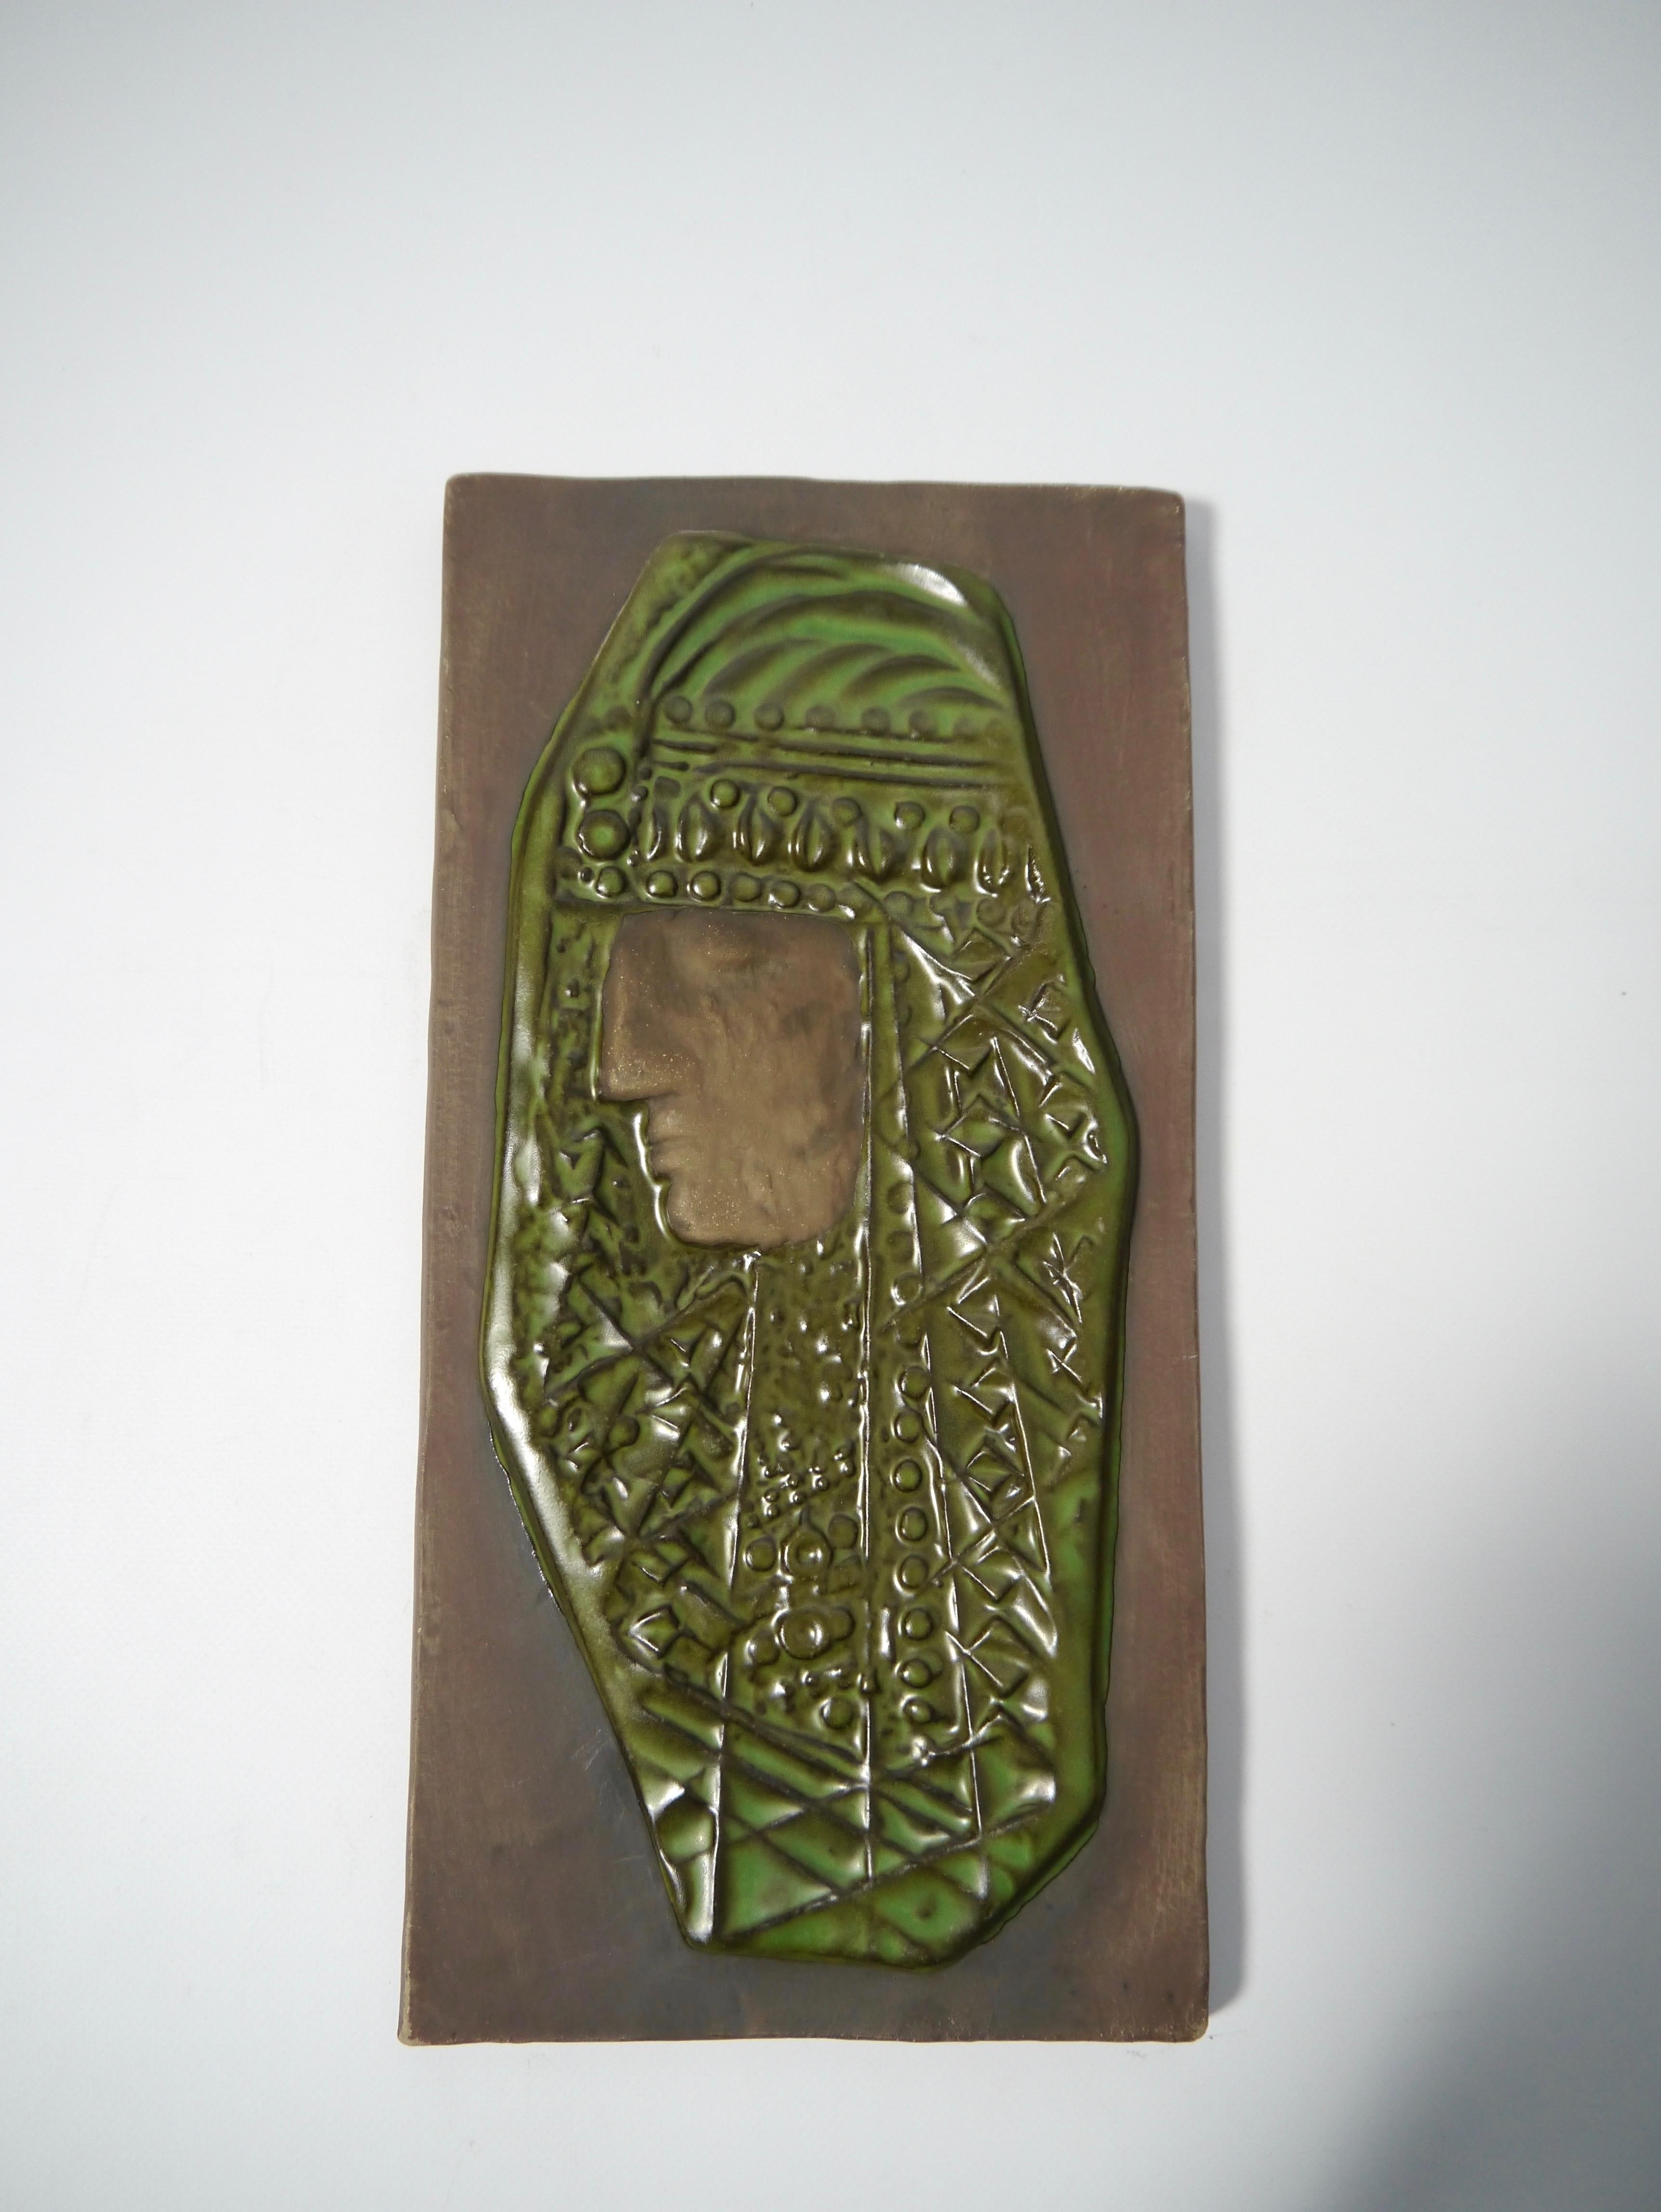 Glazed ceramic wall plaque, made by Ester Wallin for Upsala Ekeby in the end of 1960s. Depicting a middle eastern male character in sharply defined face profile, possibly Lawrence of Arabia. Marked 